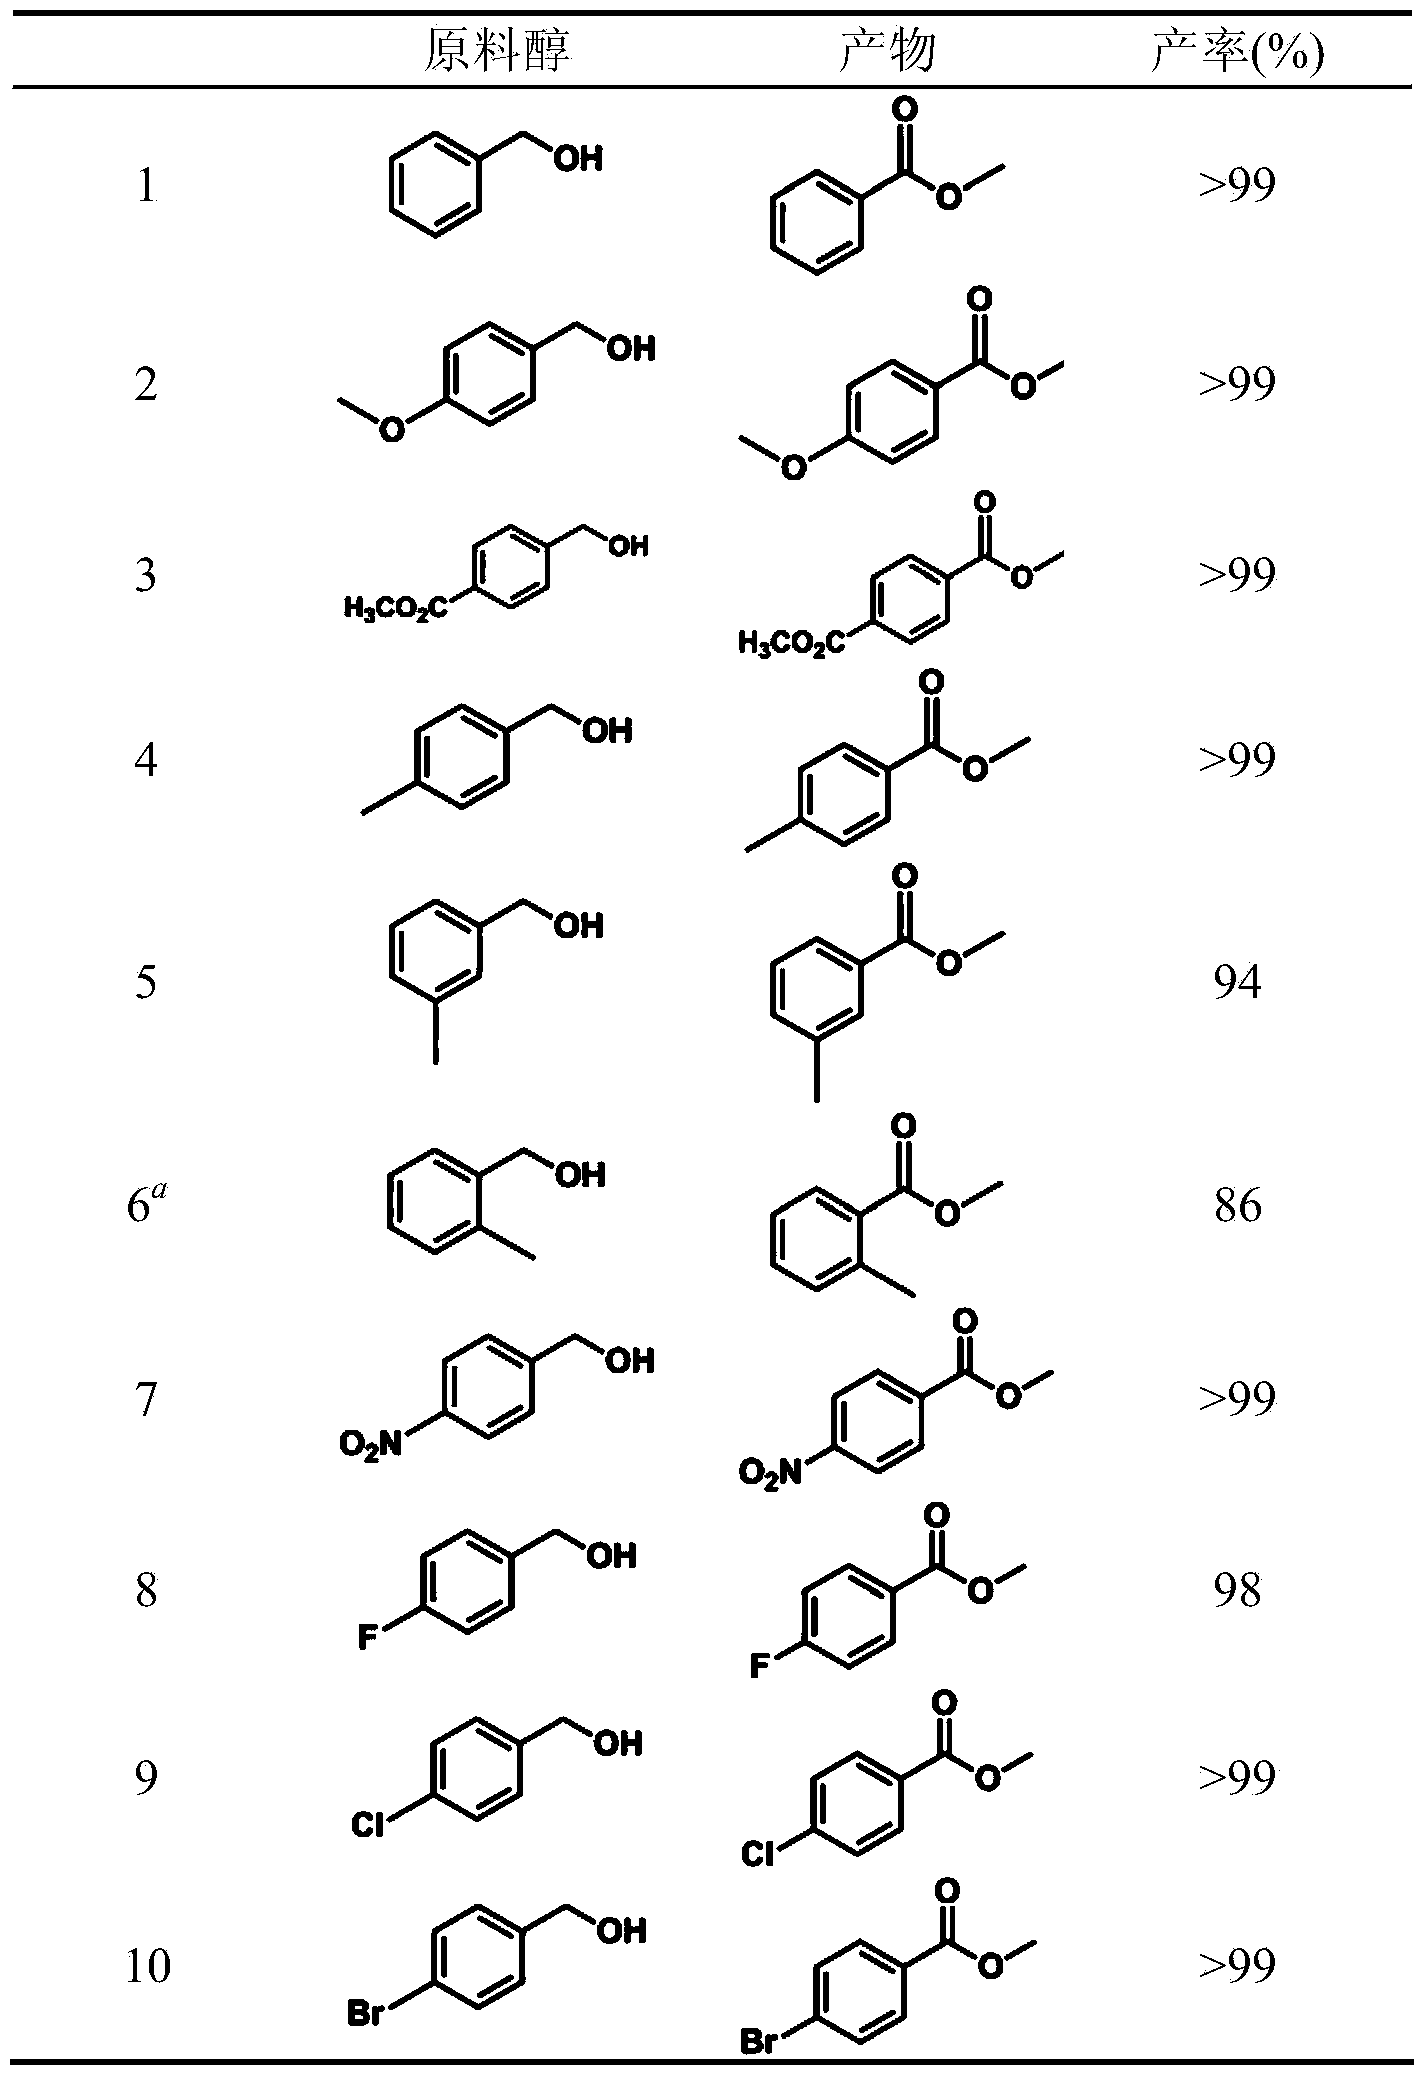 Cobalt-based catalyst for generating ester by alcohol oxidation, and preparation method and application of cobalt-based catalyst